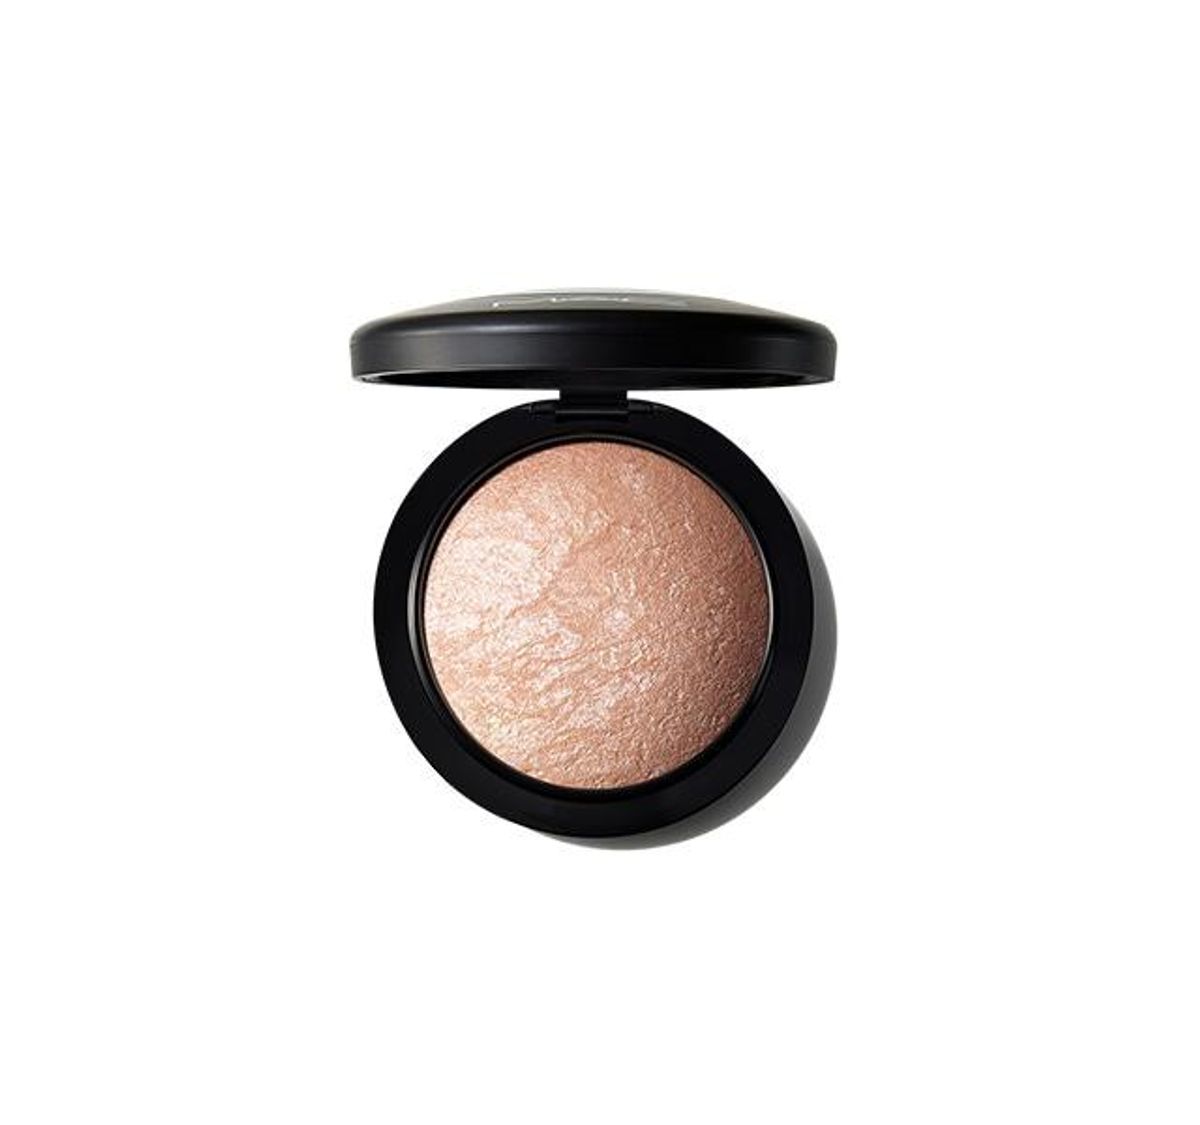 Mineralize Skinfinish in Soft and Gentle